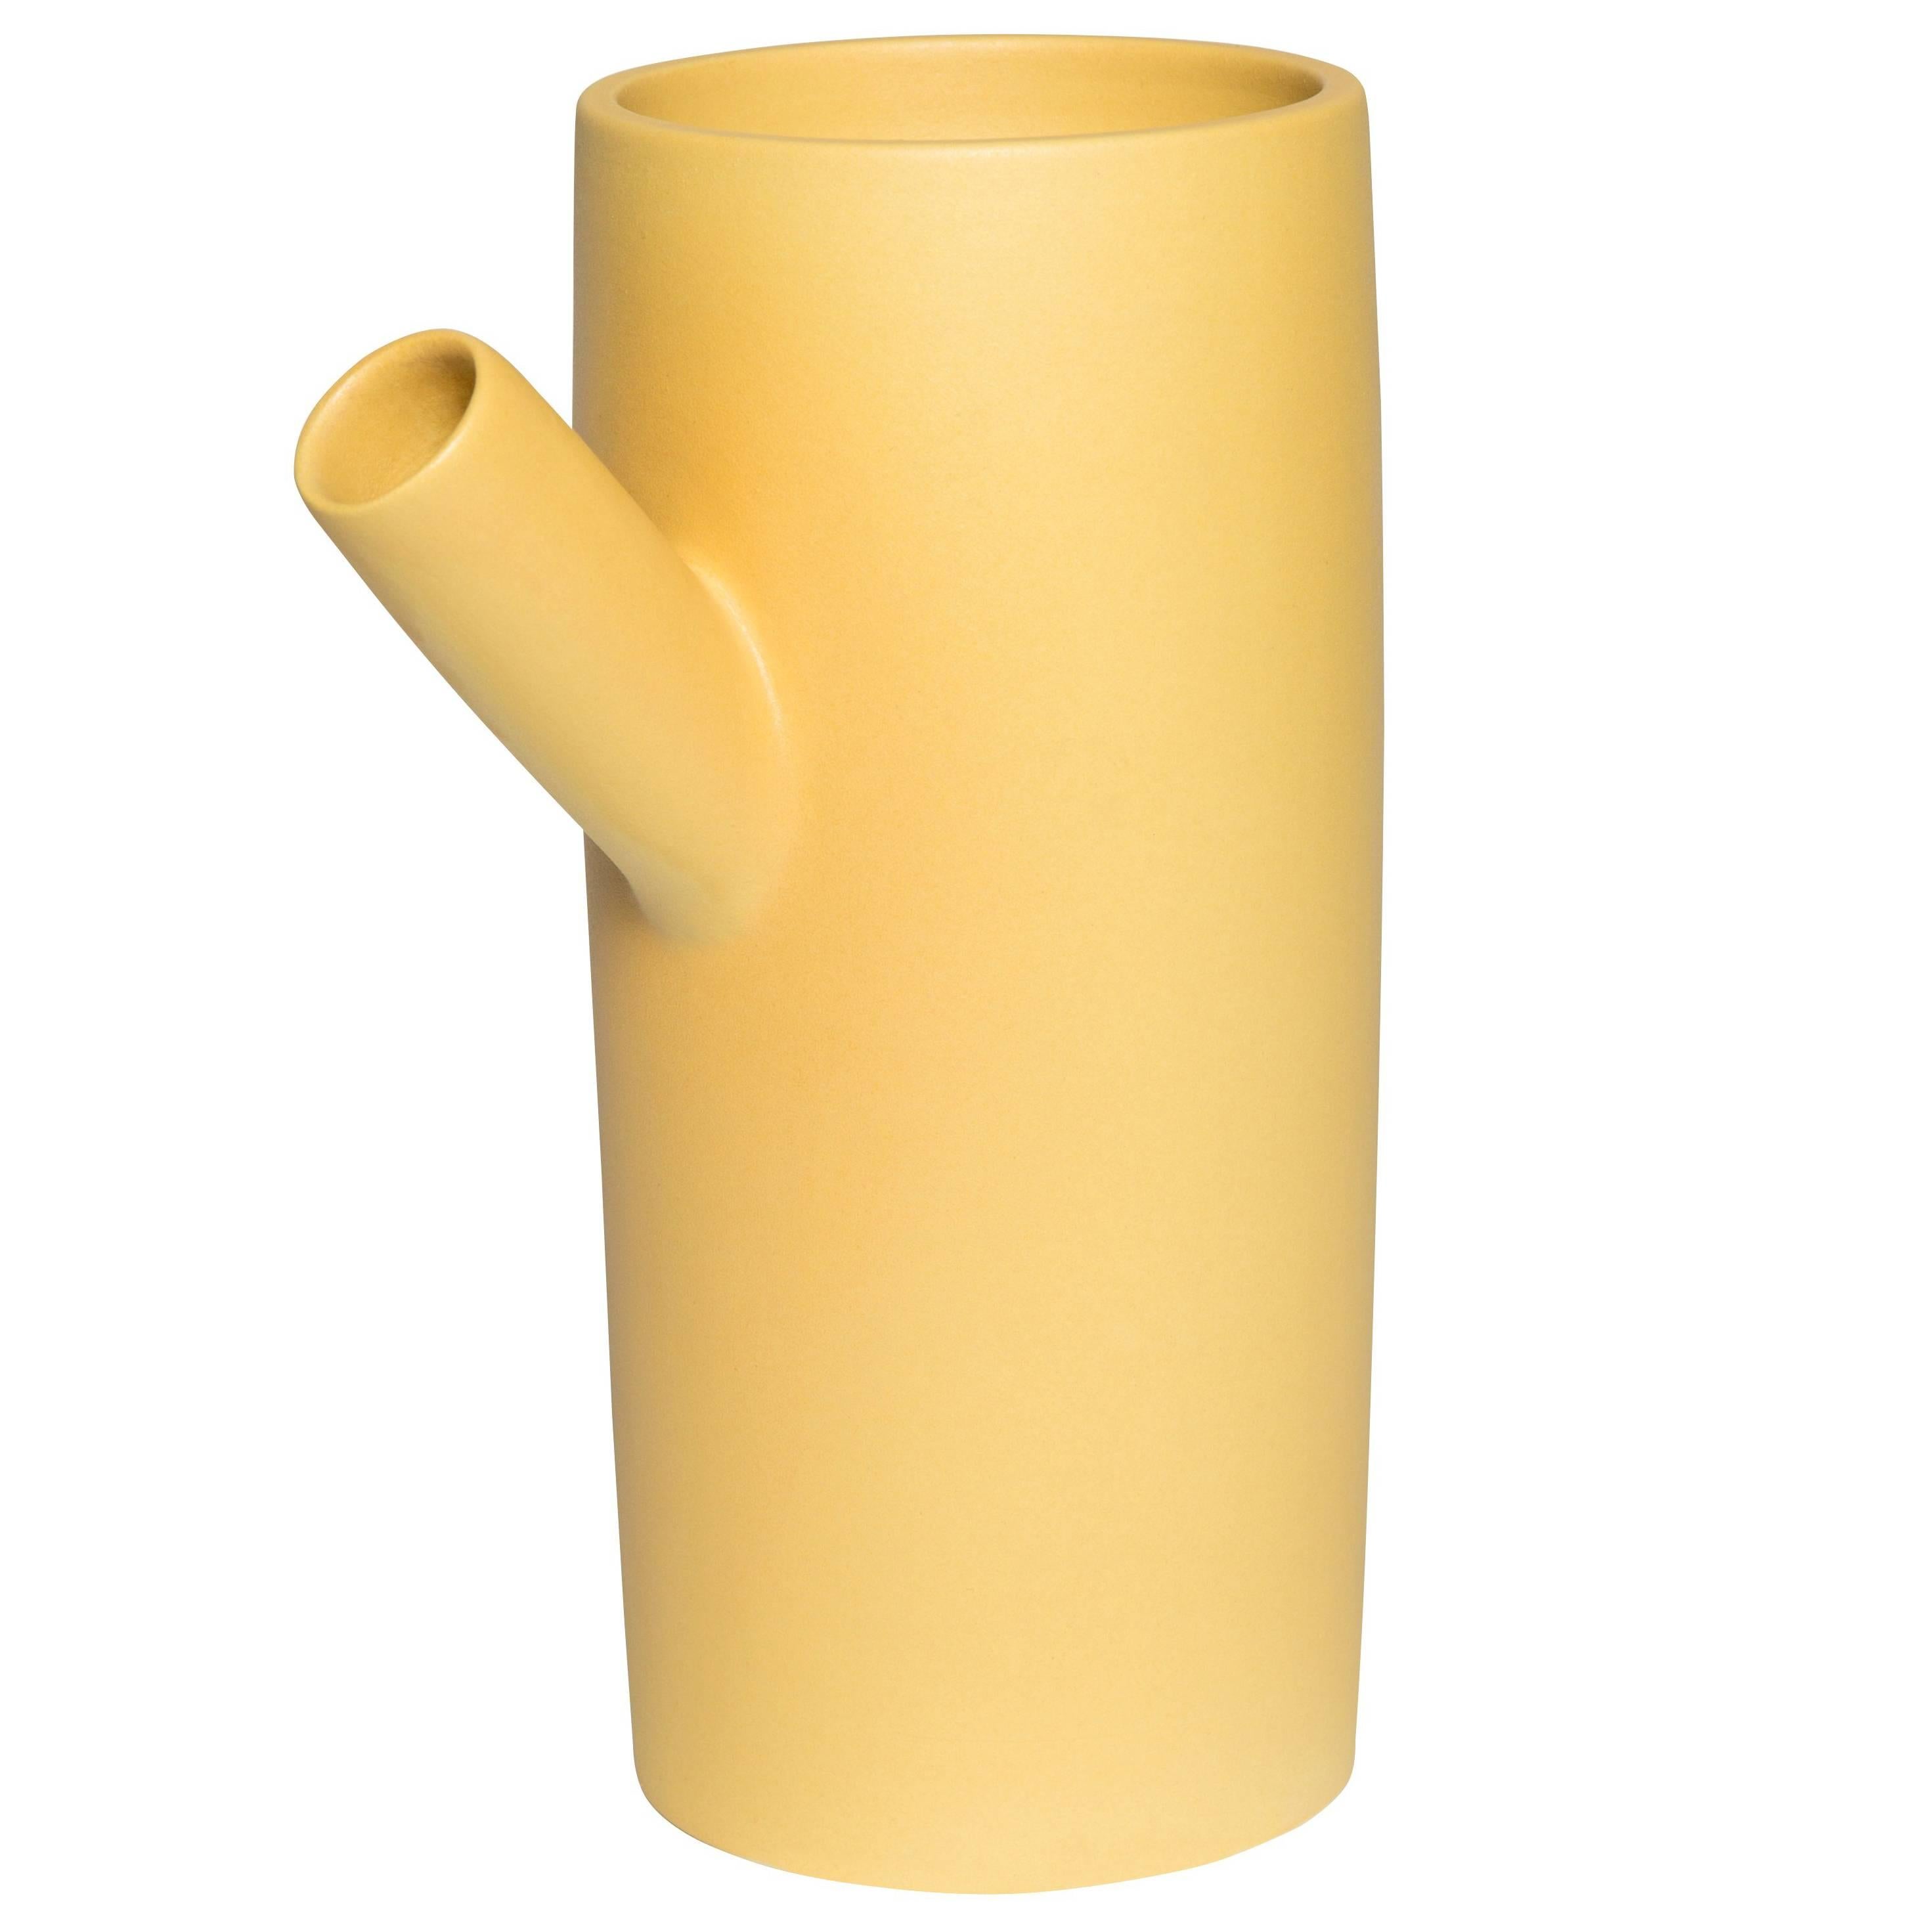  Forsythia Ceramic Handmade Vase by Pieces, Modern Customizable Yellow Pitcher For Sale